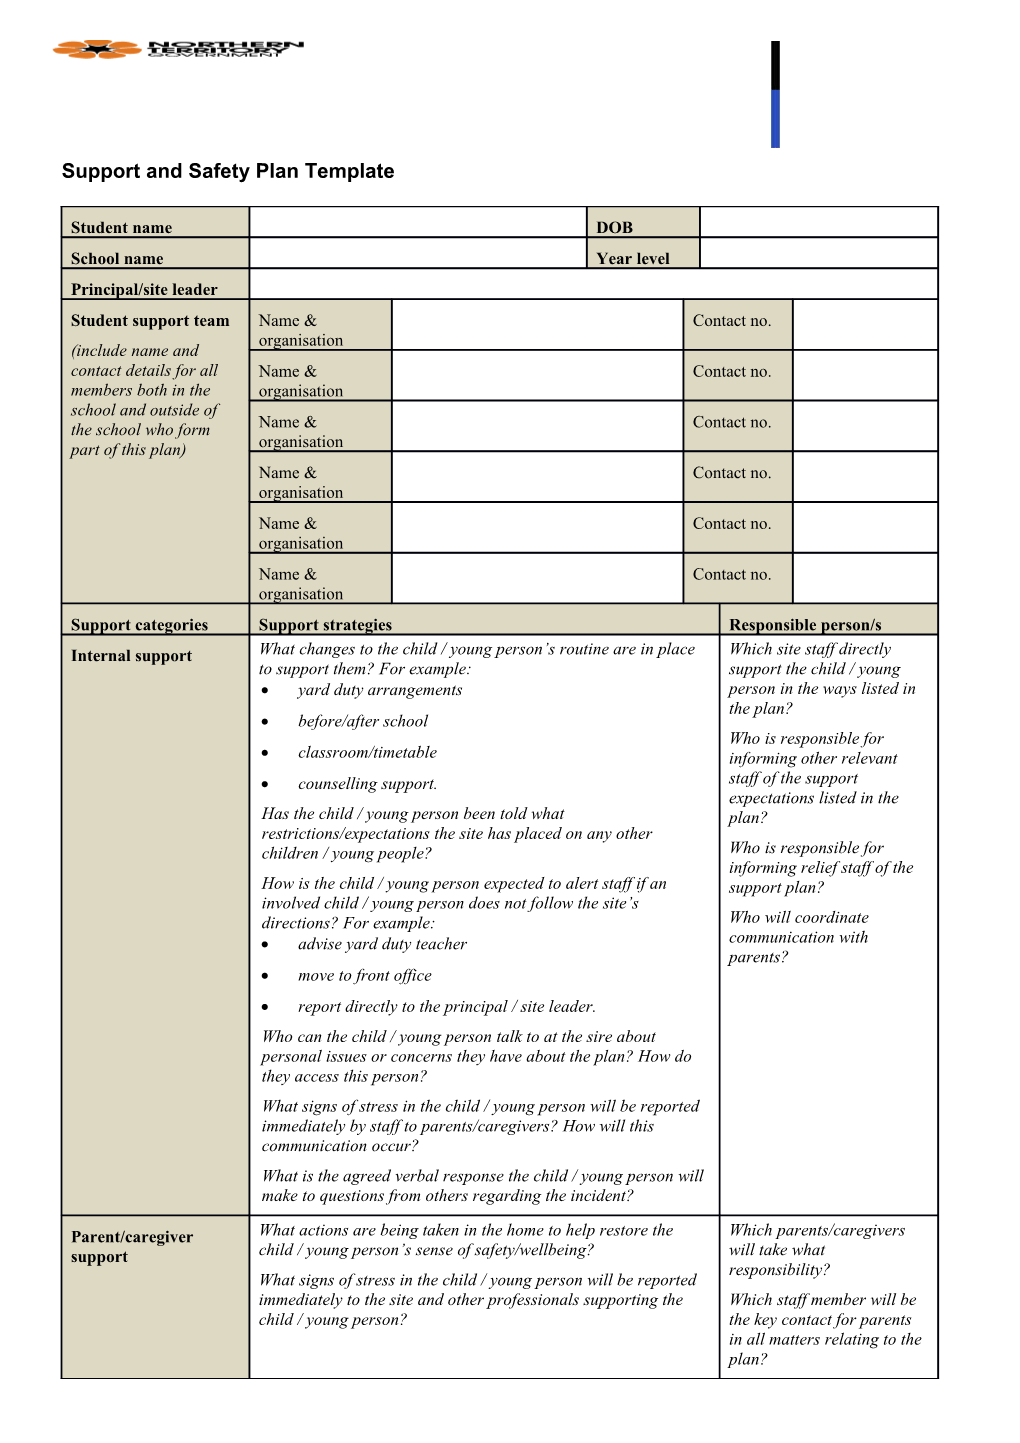 Support and Safety Plan Template